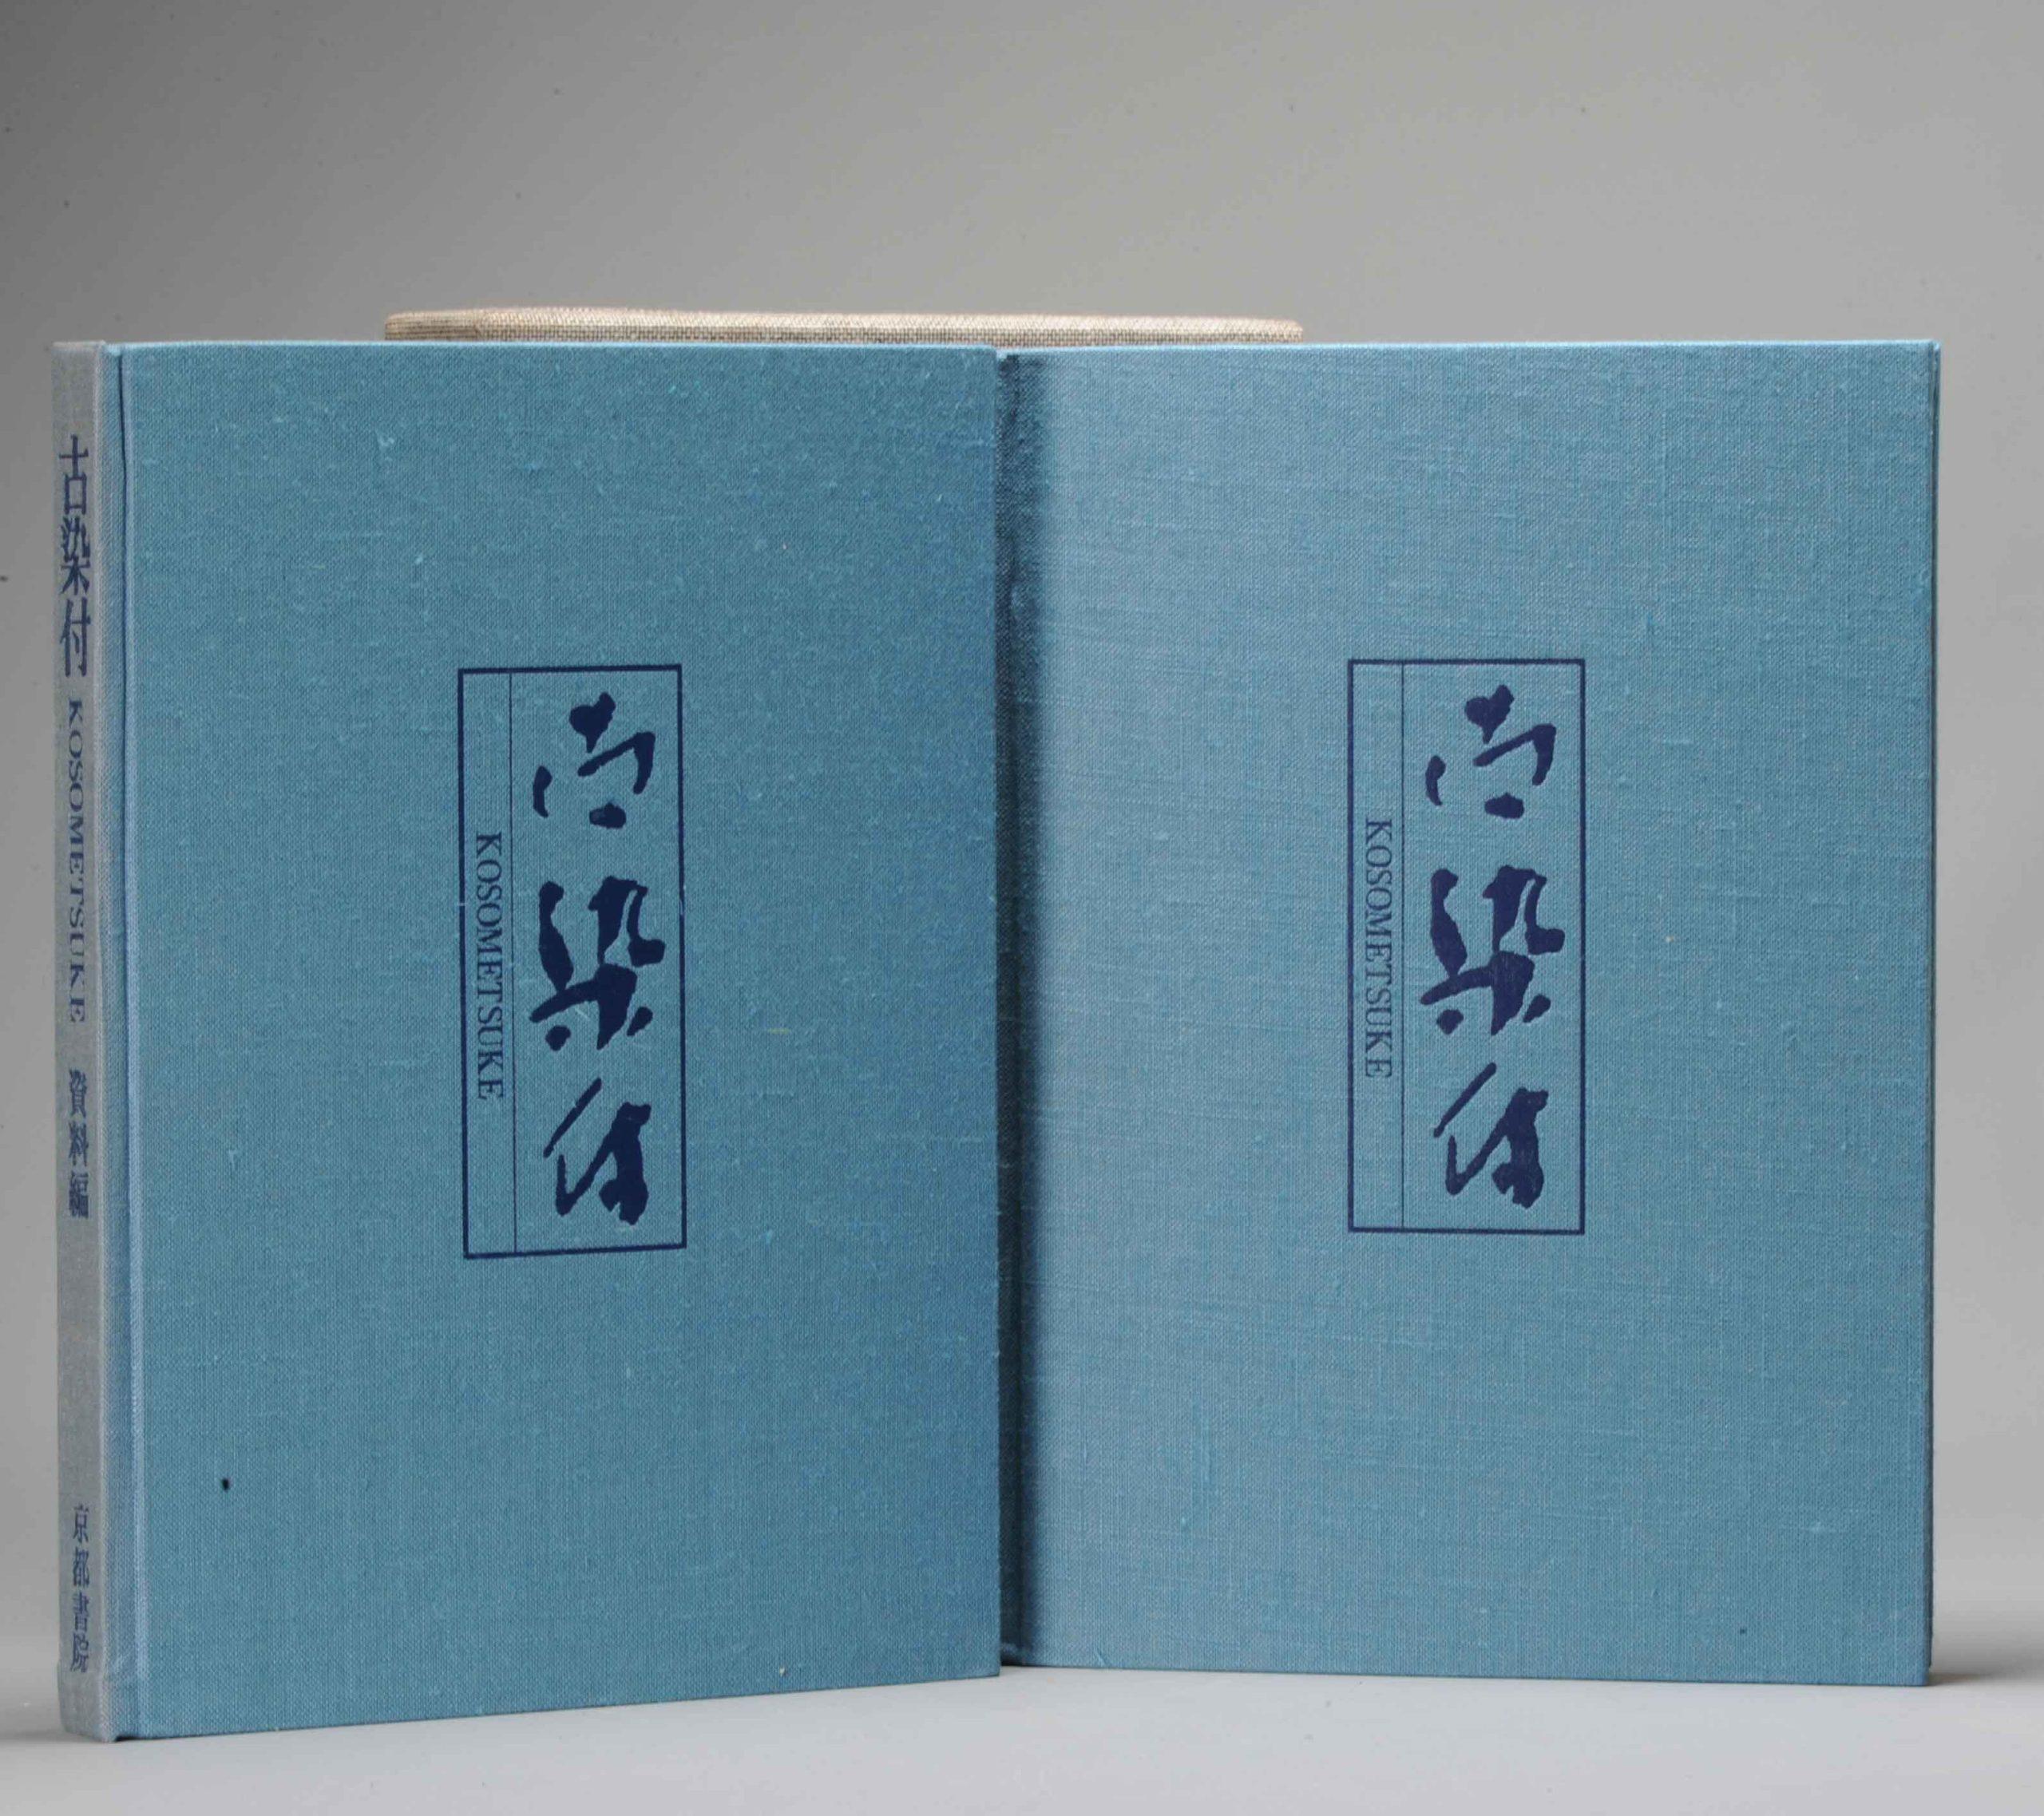 Ko-Sometsuke (two volume set in slipcase)
Masahiko Kawahara

Hard T0 Find.; Two volume set comprising Color Section and Monochrome Section

With texts by the noted ceramic scholar Masahiko Kawahara, this two-volume publication illustrates a vast